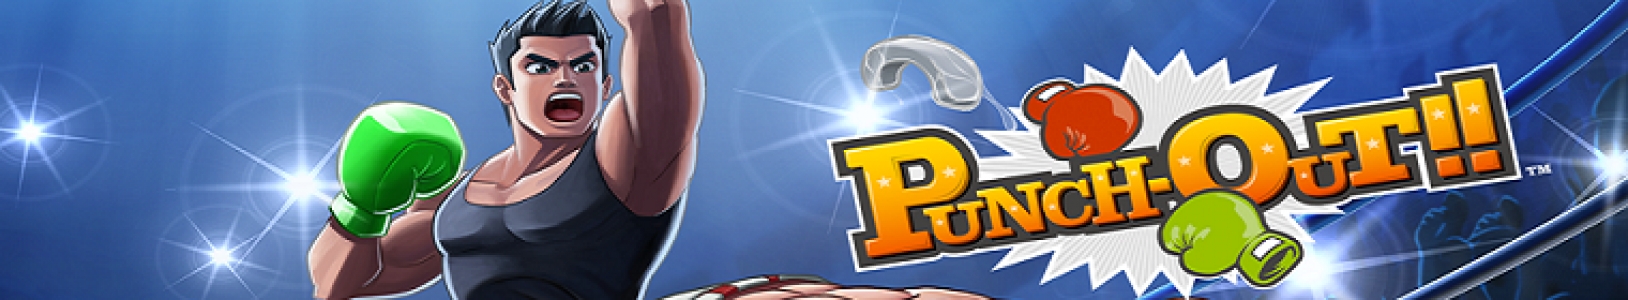 Punch-Out!! banner